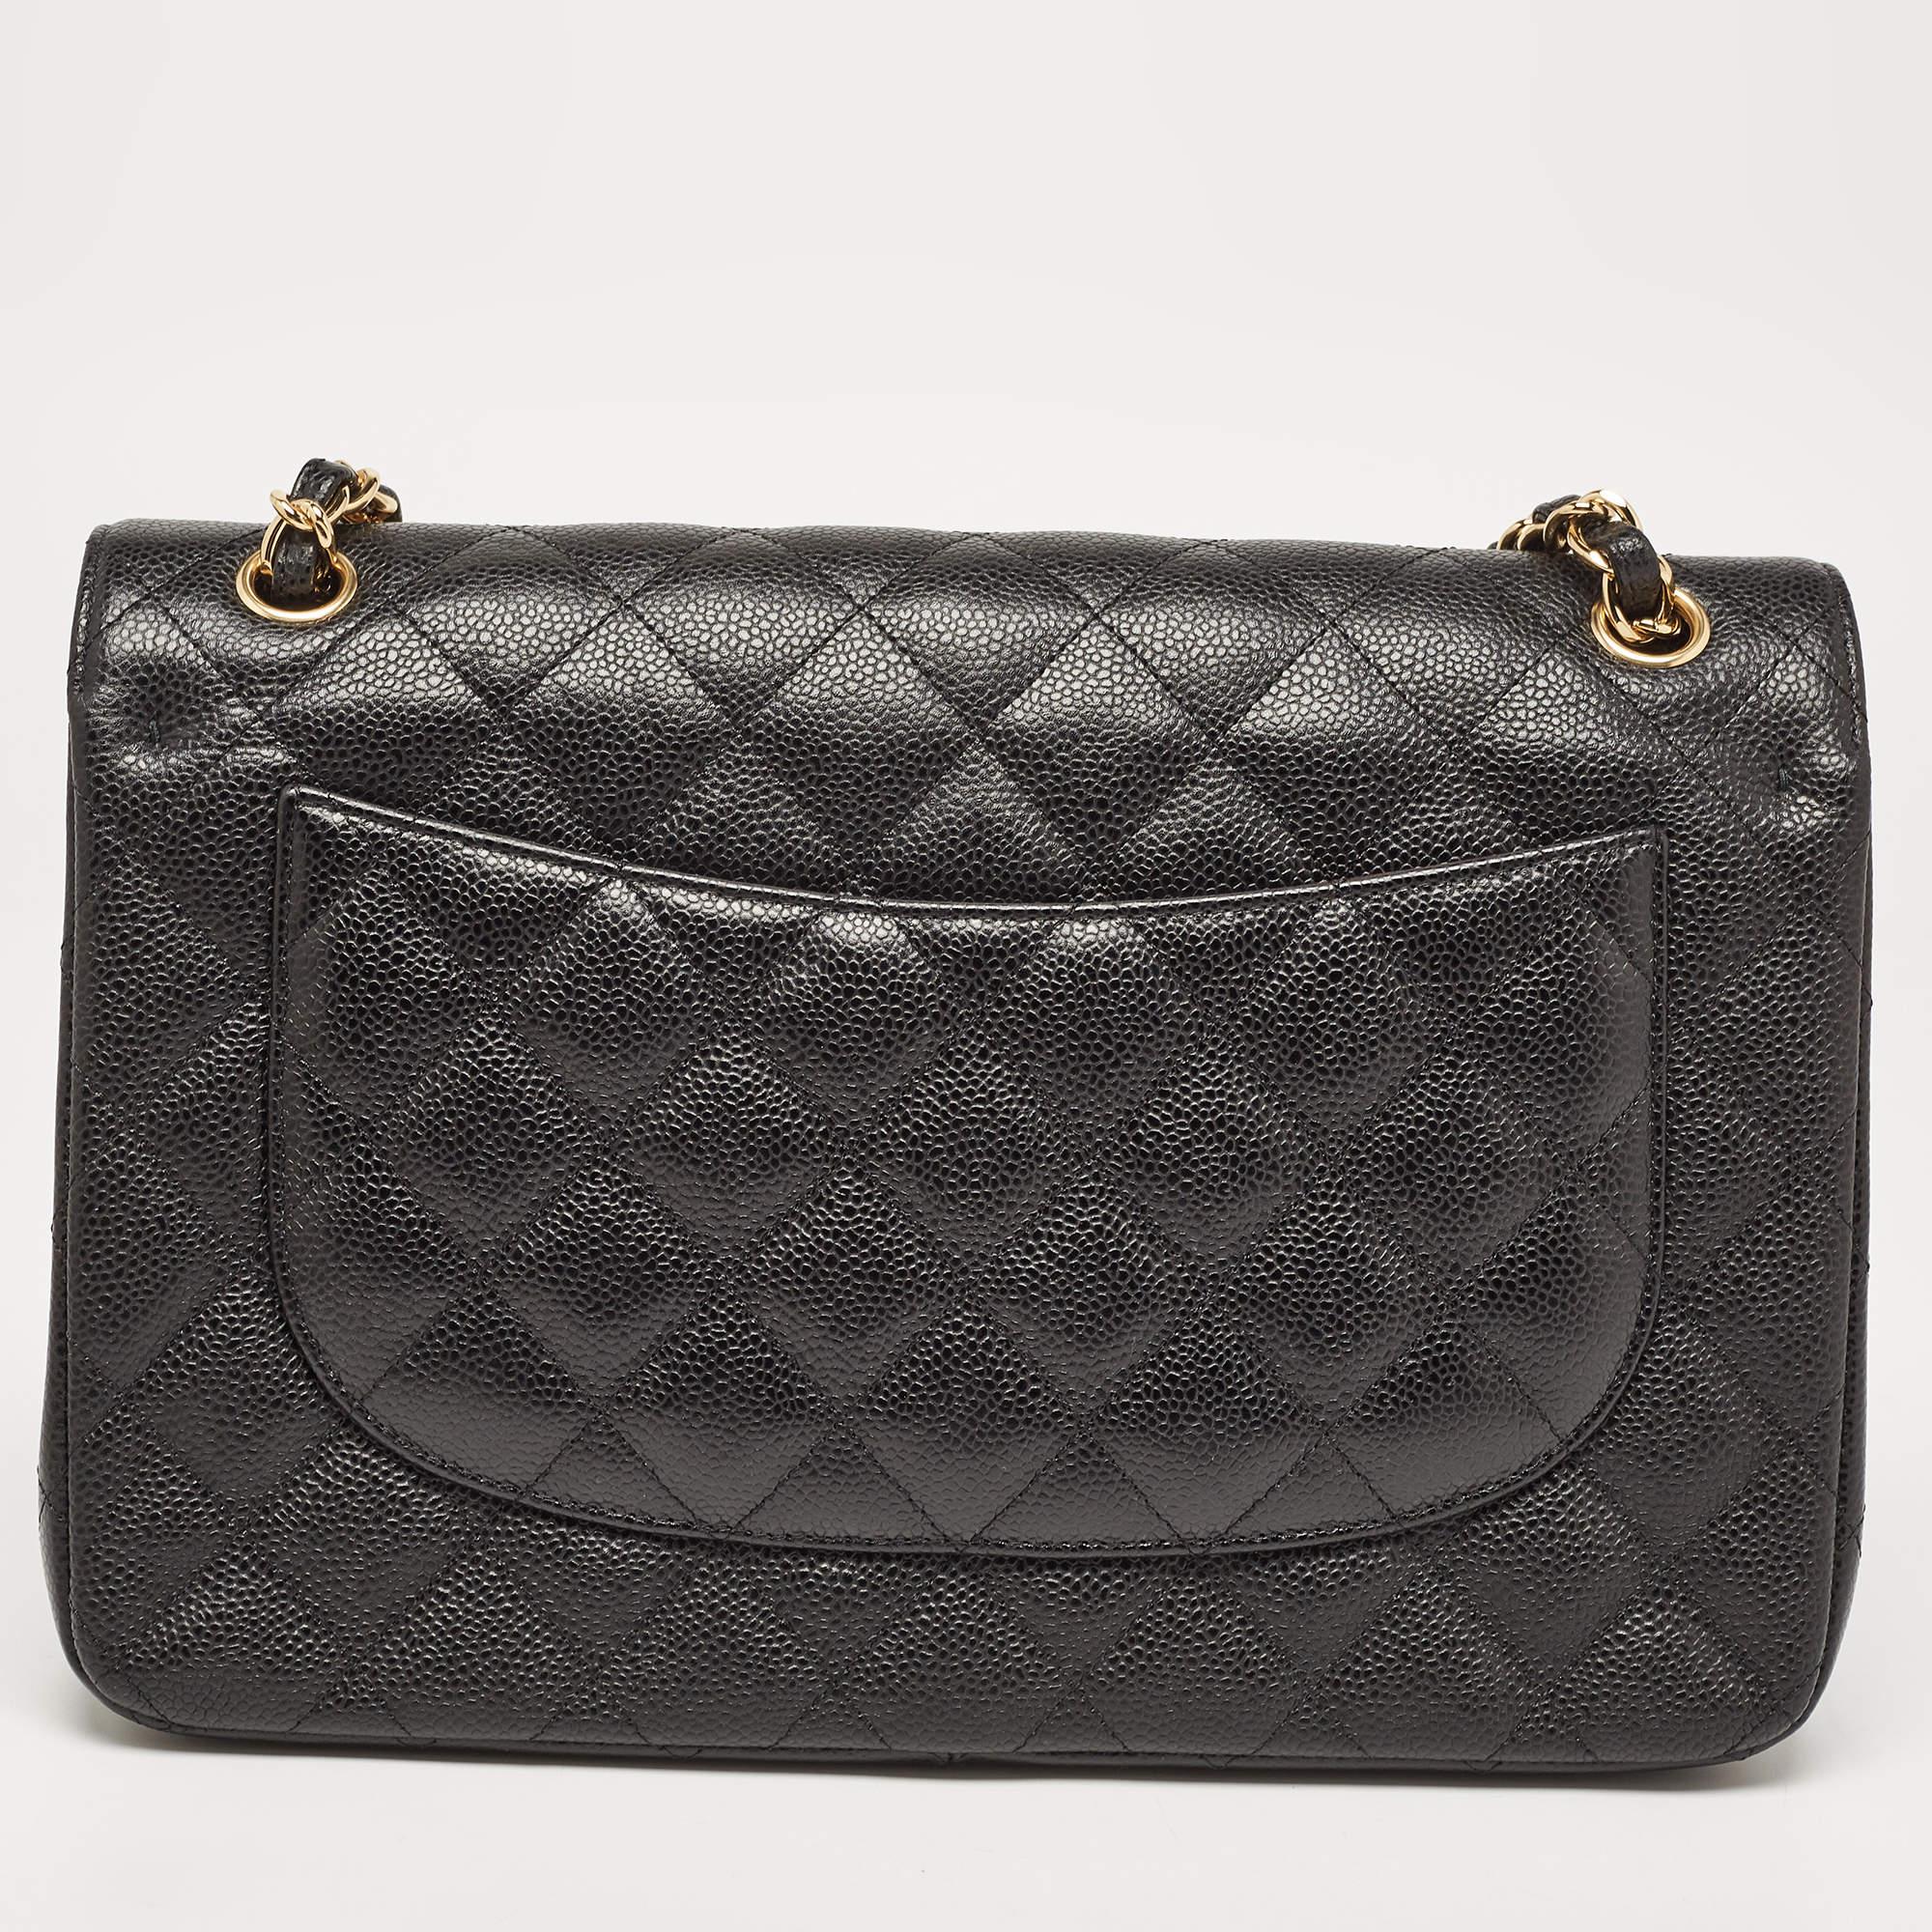 Chanel Black Quilted Caviar Leather Jumbo Classic Double Flap Bag 11